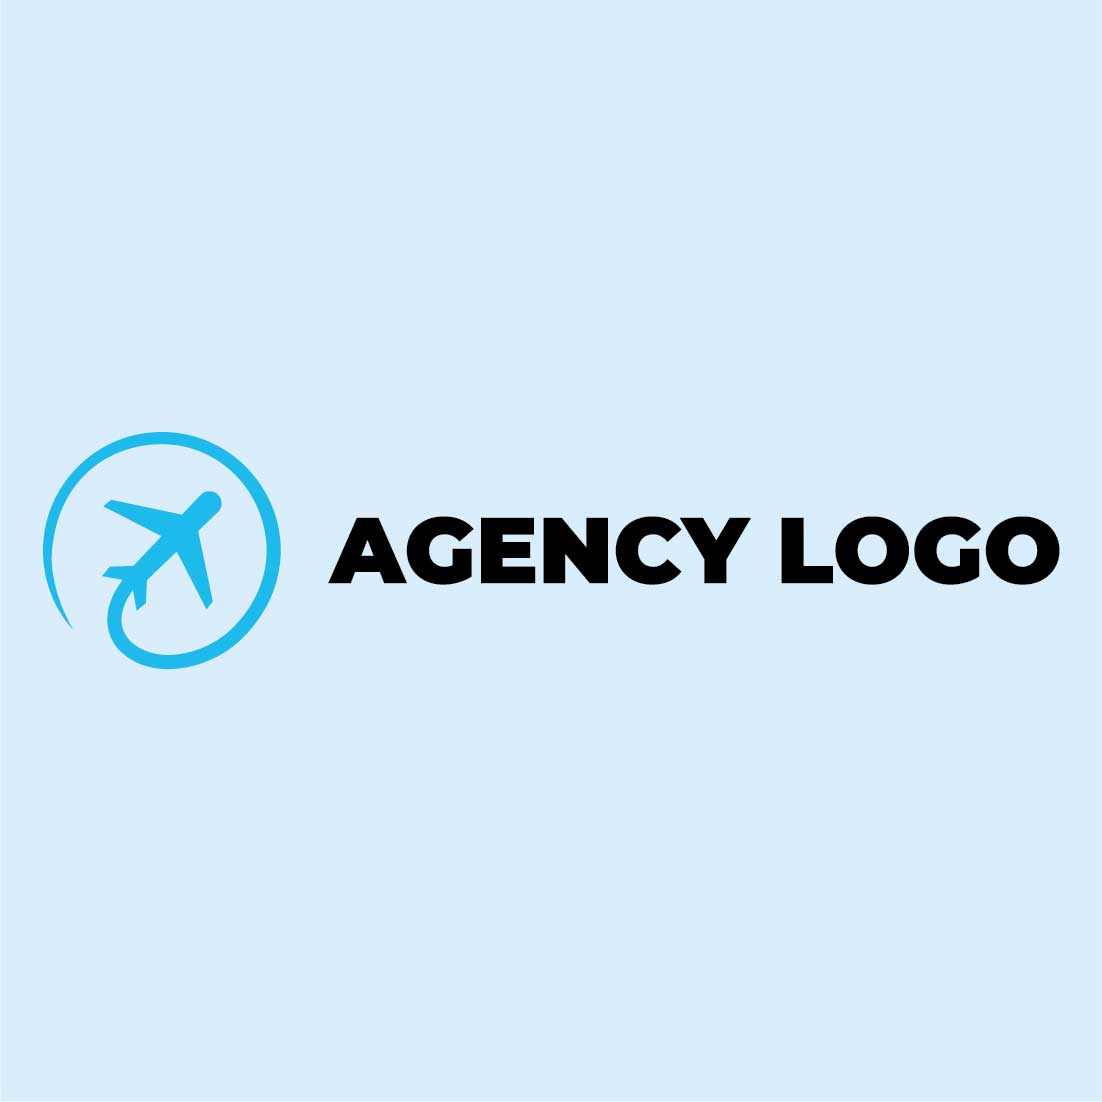 Vector logo design templates for airlines, airplane tickets, travel agencies, Agency Logo - planes and emblems cover image.